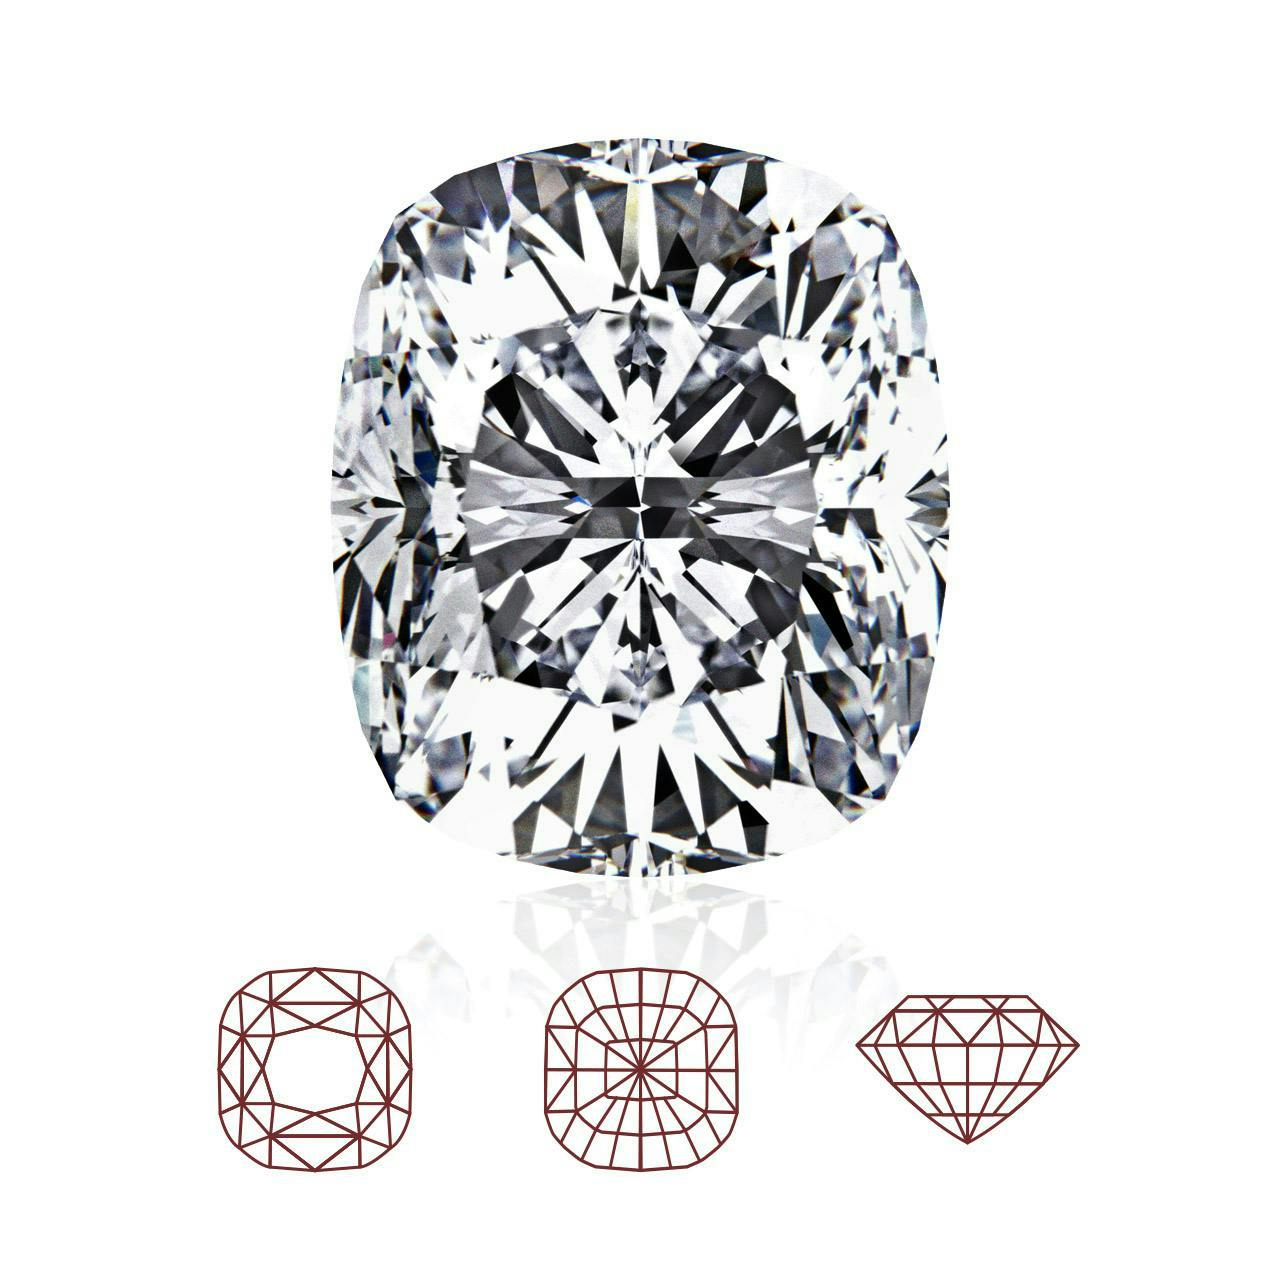 Cushion cut among different types of diamond cut from different angles